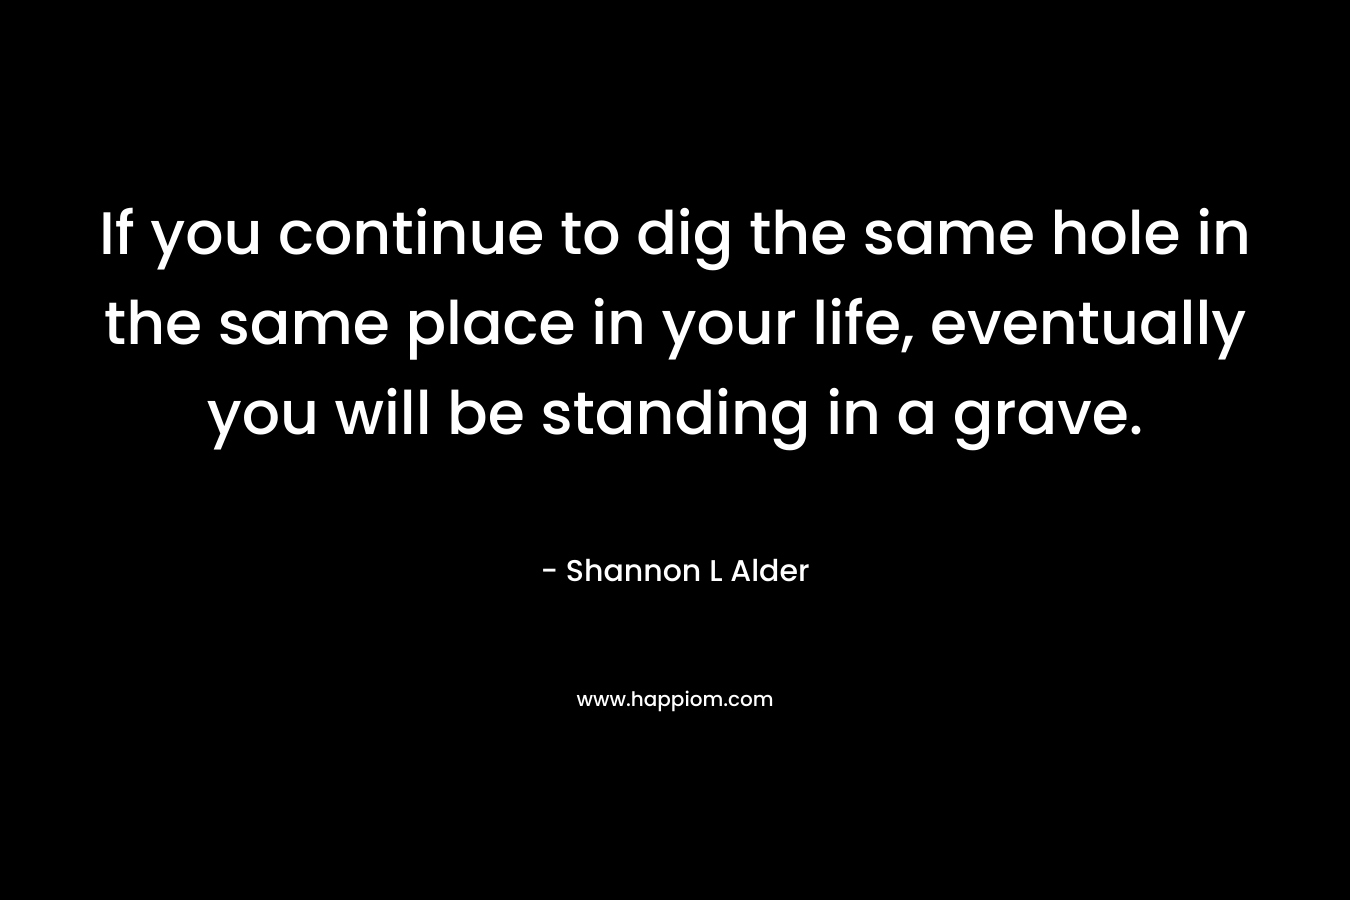 If you continue to dig the same hole in the same place in your life, eventually you will be standing in a grave. – Shannon L Alder